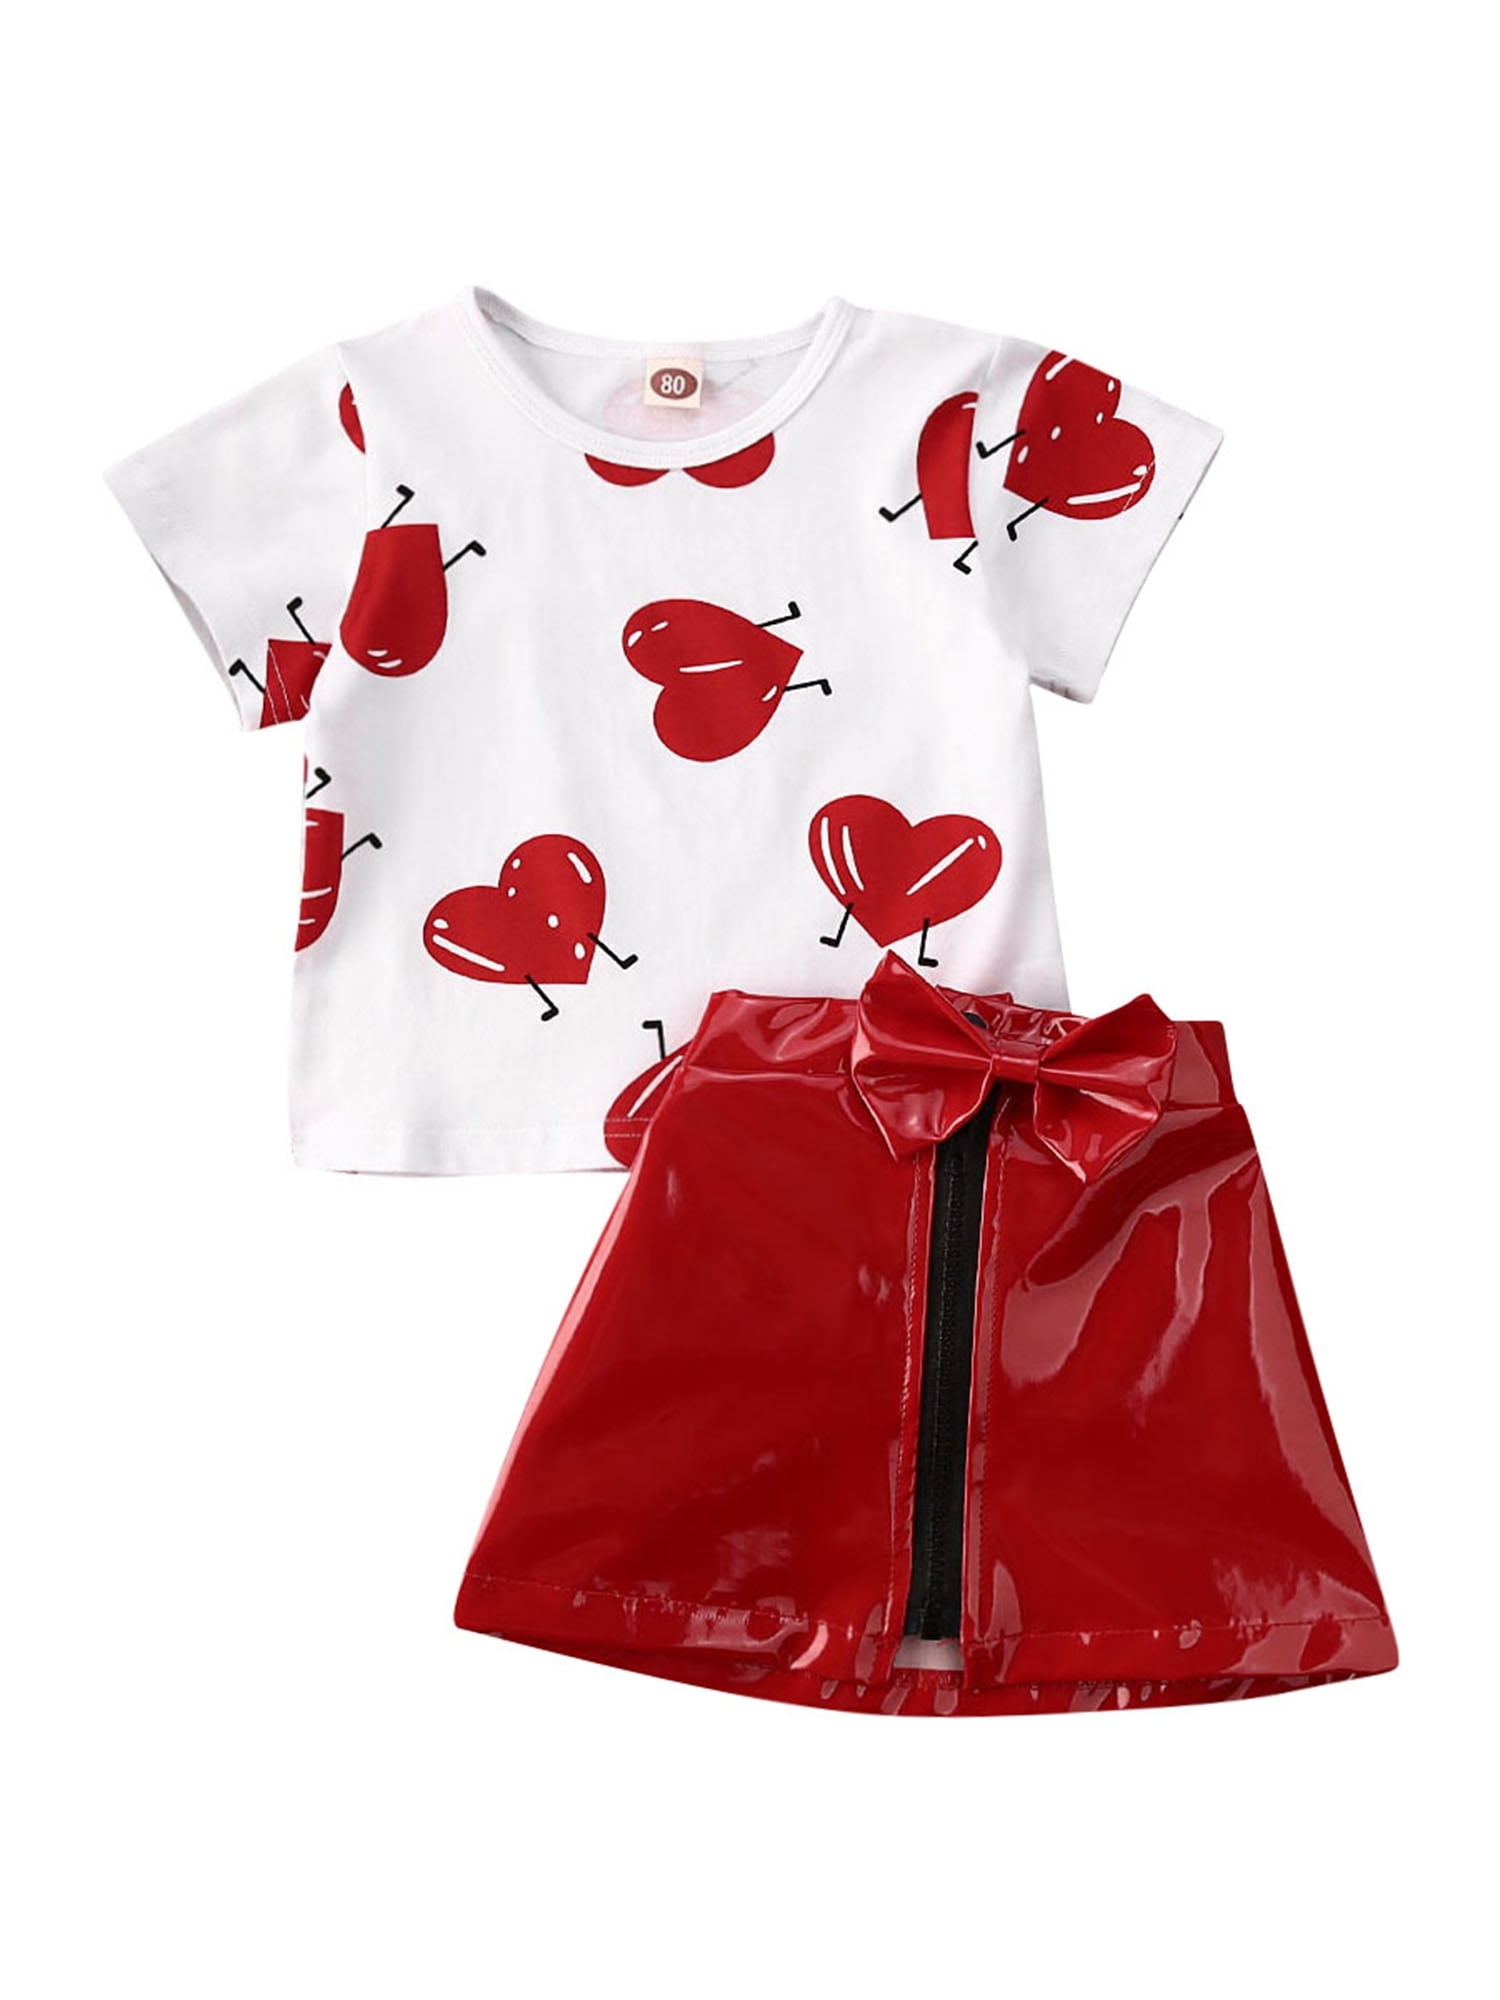 Details about   Mickey junior Girls Red Tshirt size 5T